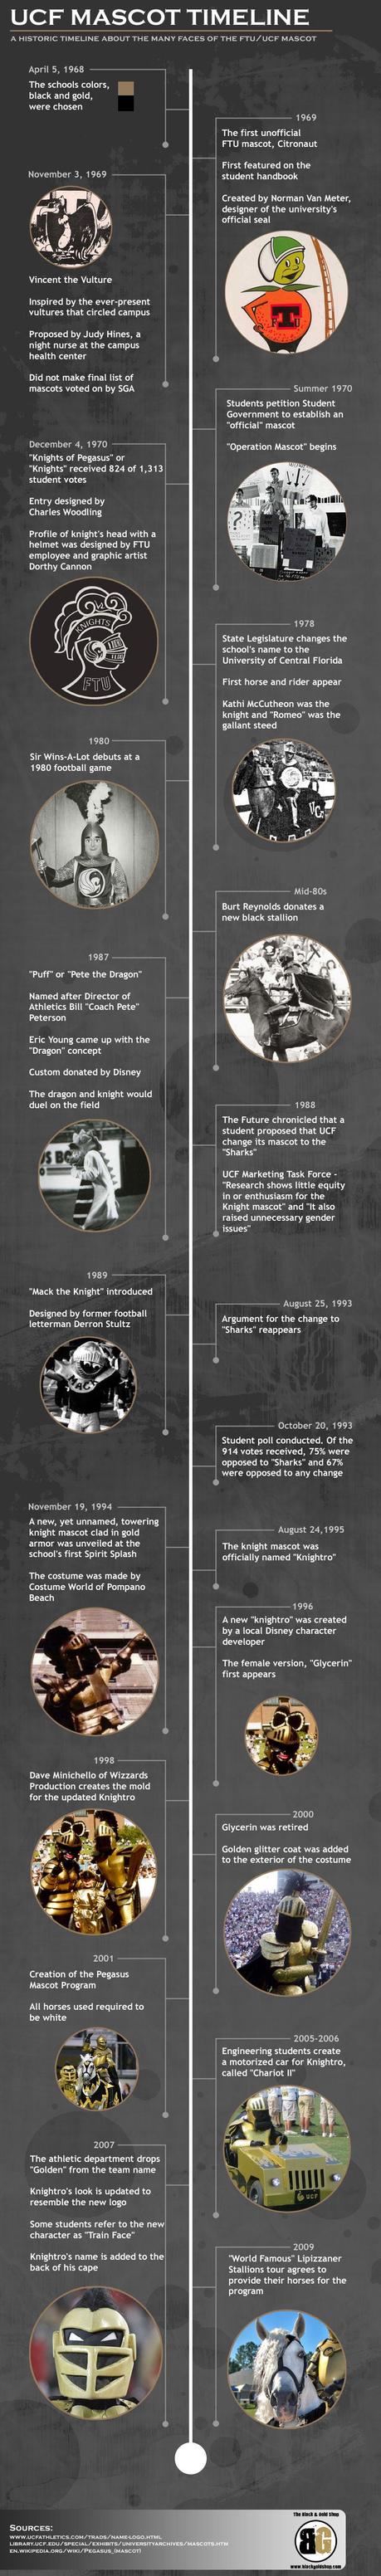 Infographic Timeline About The UCF Mascot